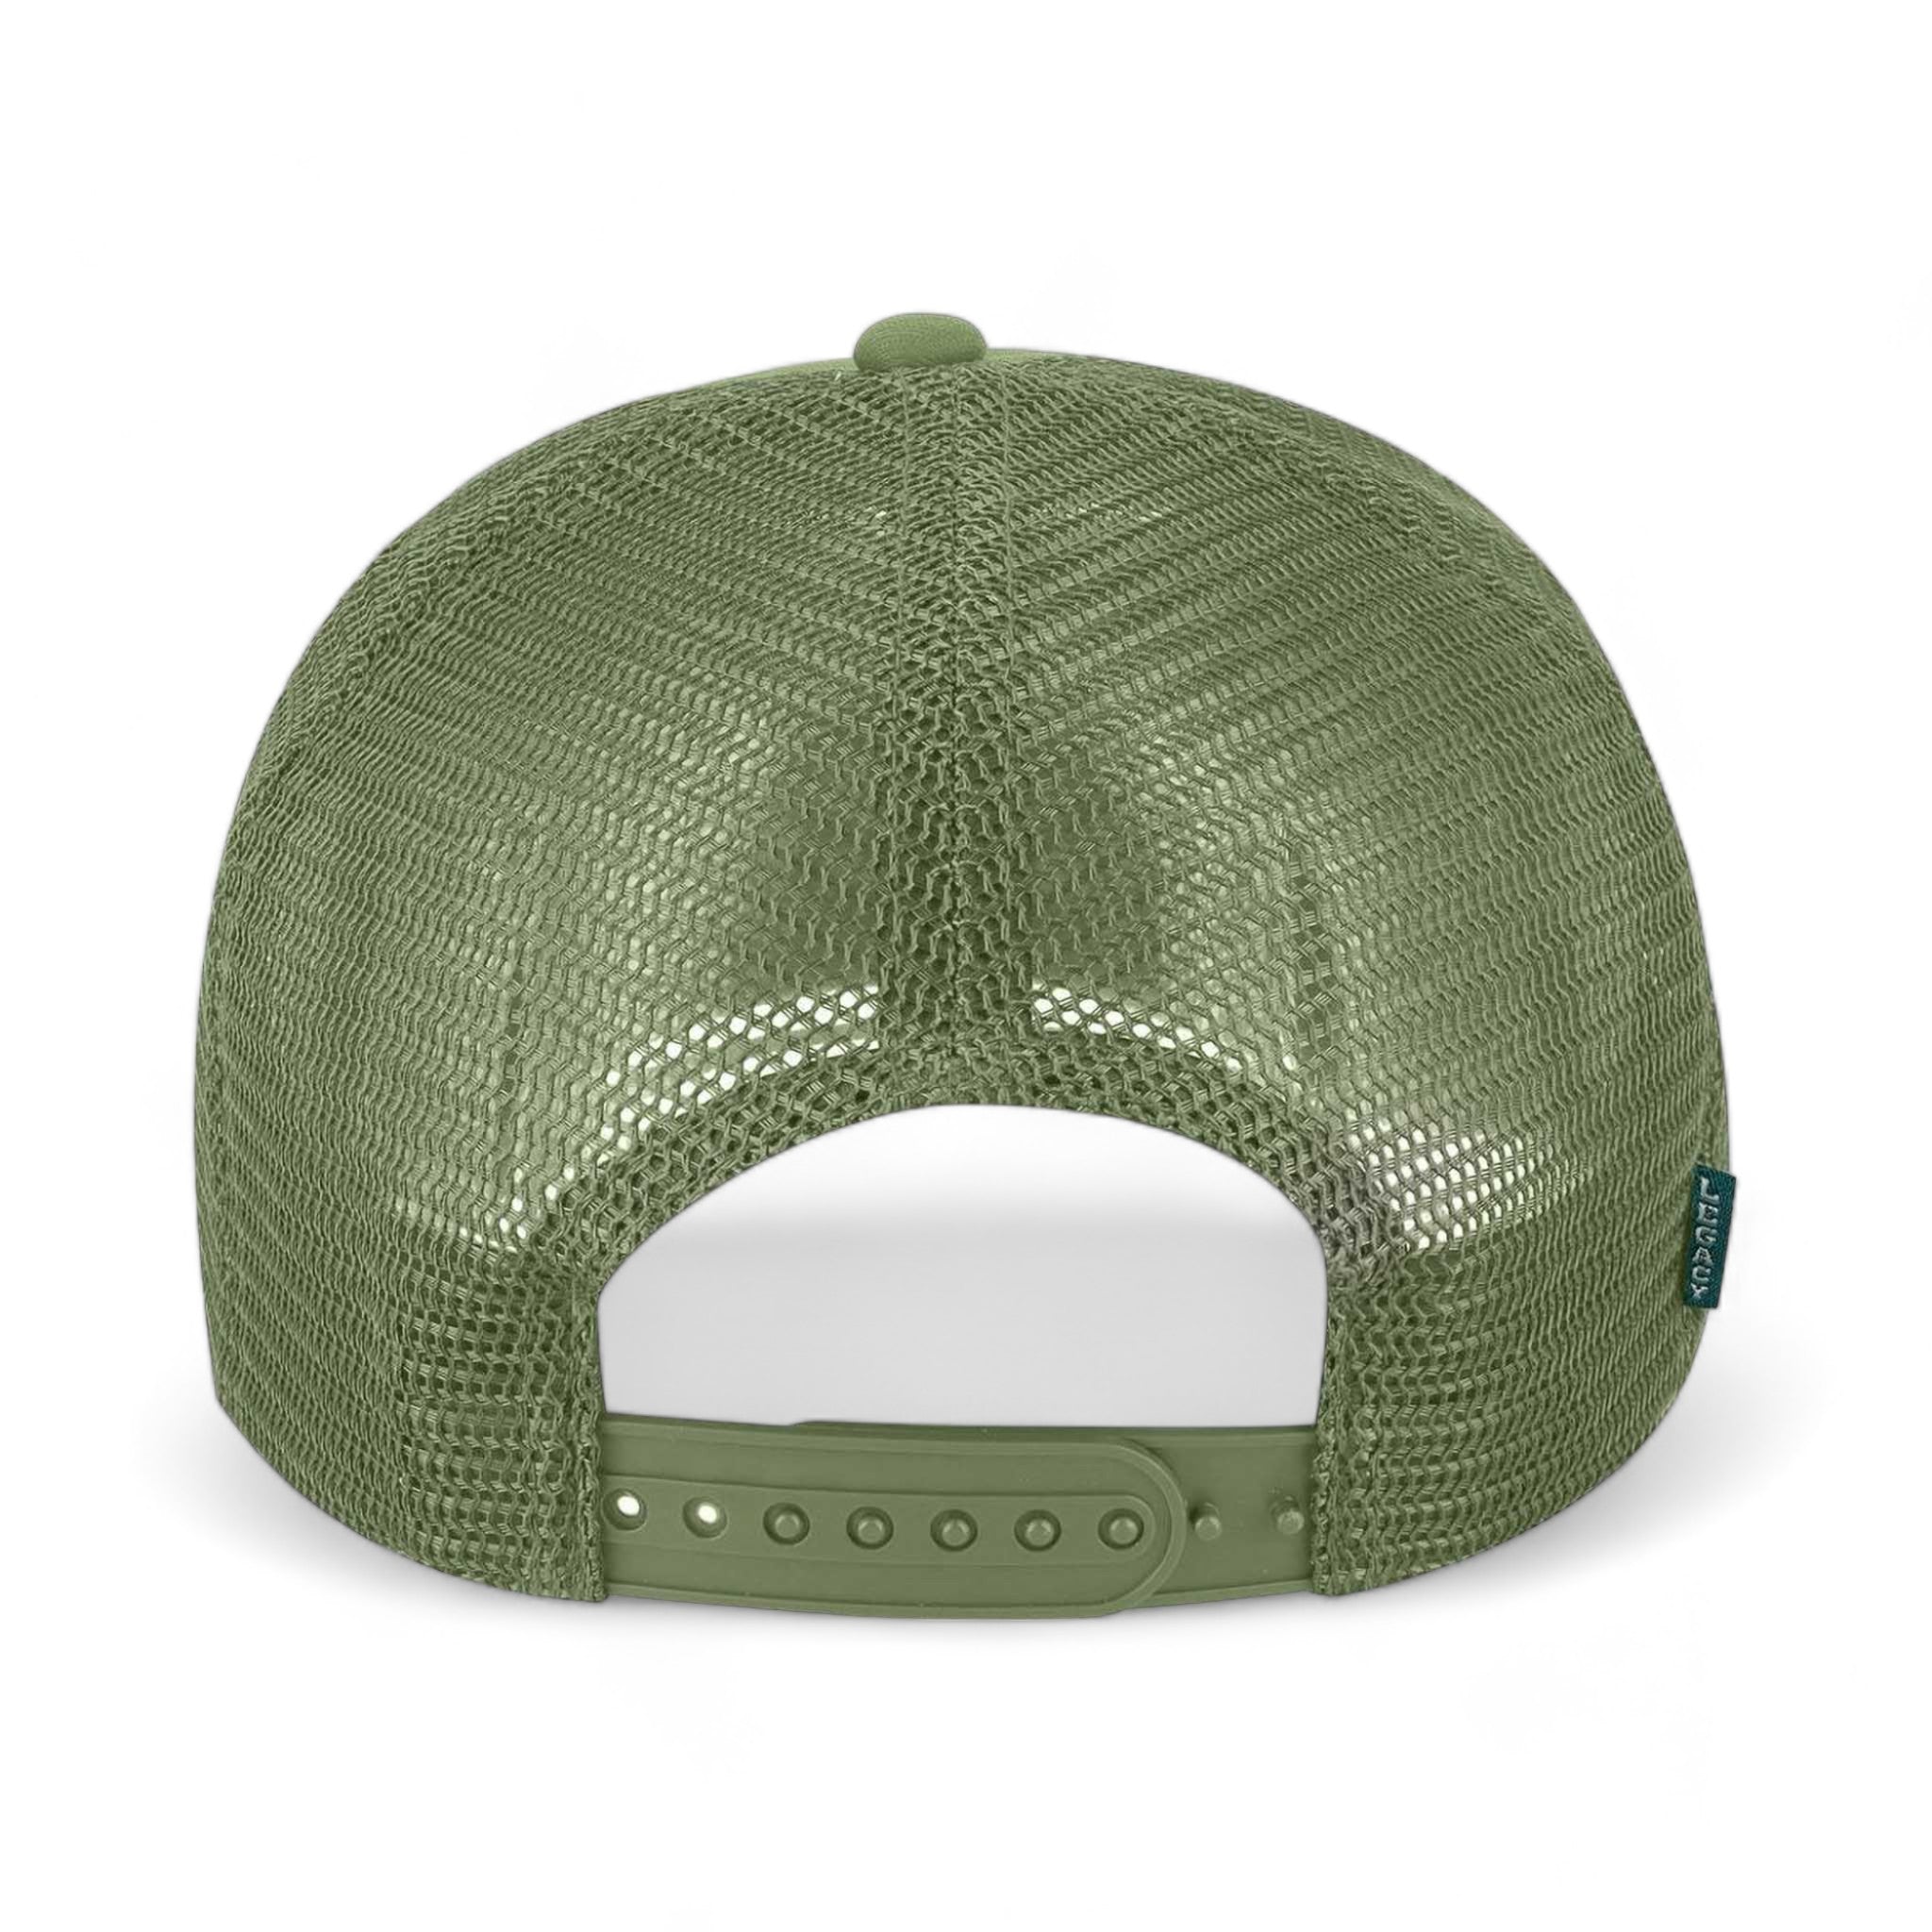 Back view of LEGACY LTA custom hat in light olive green